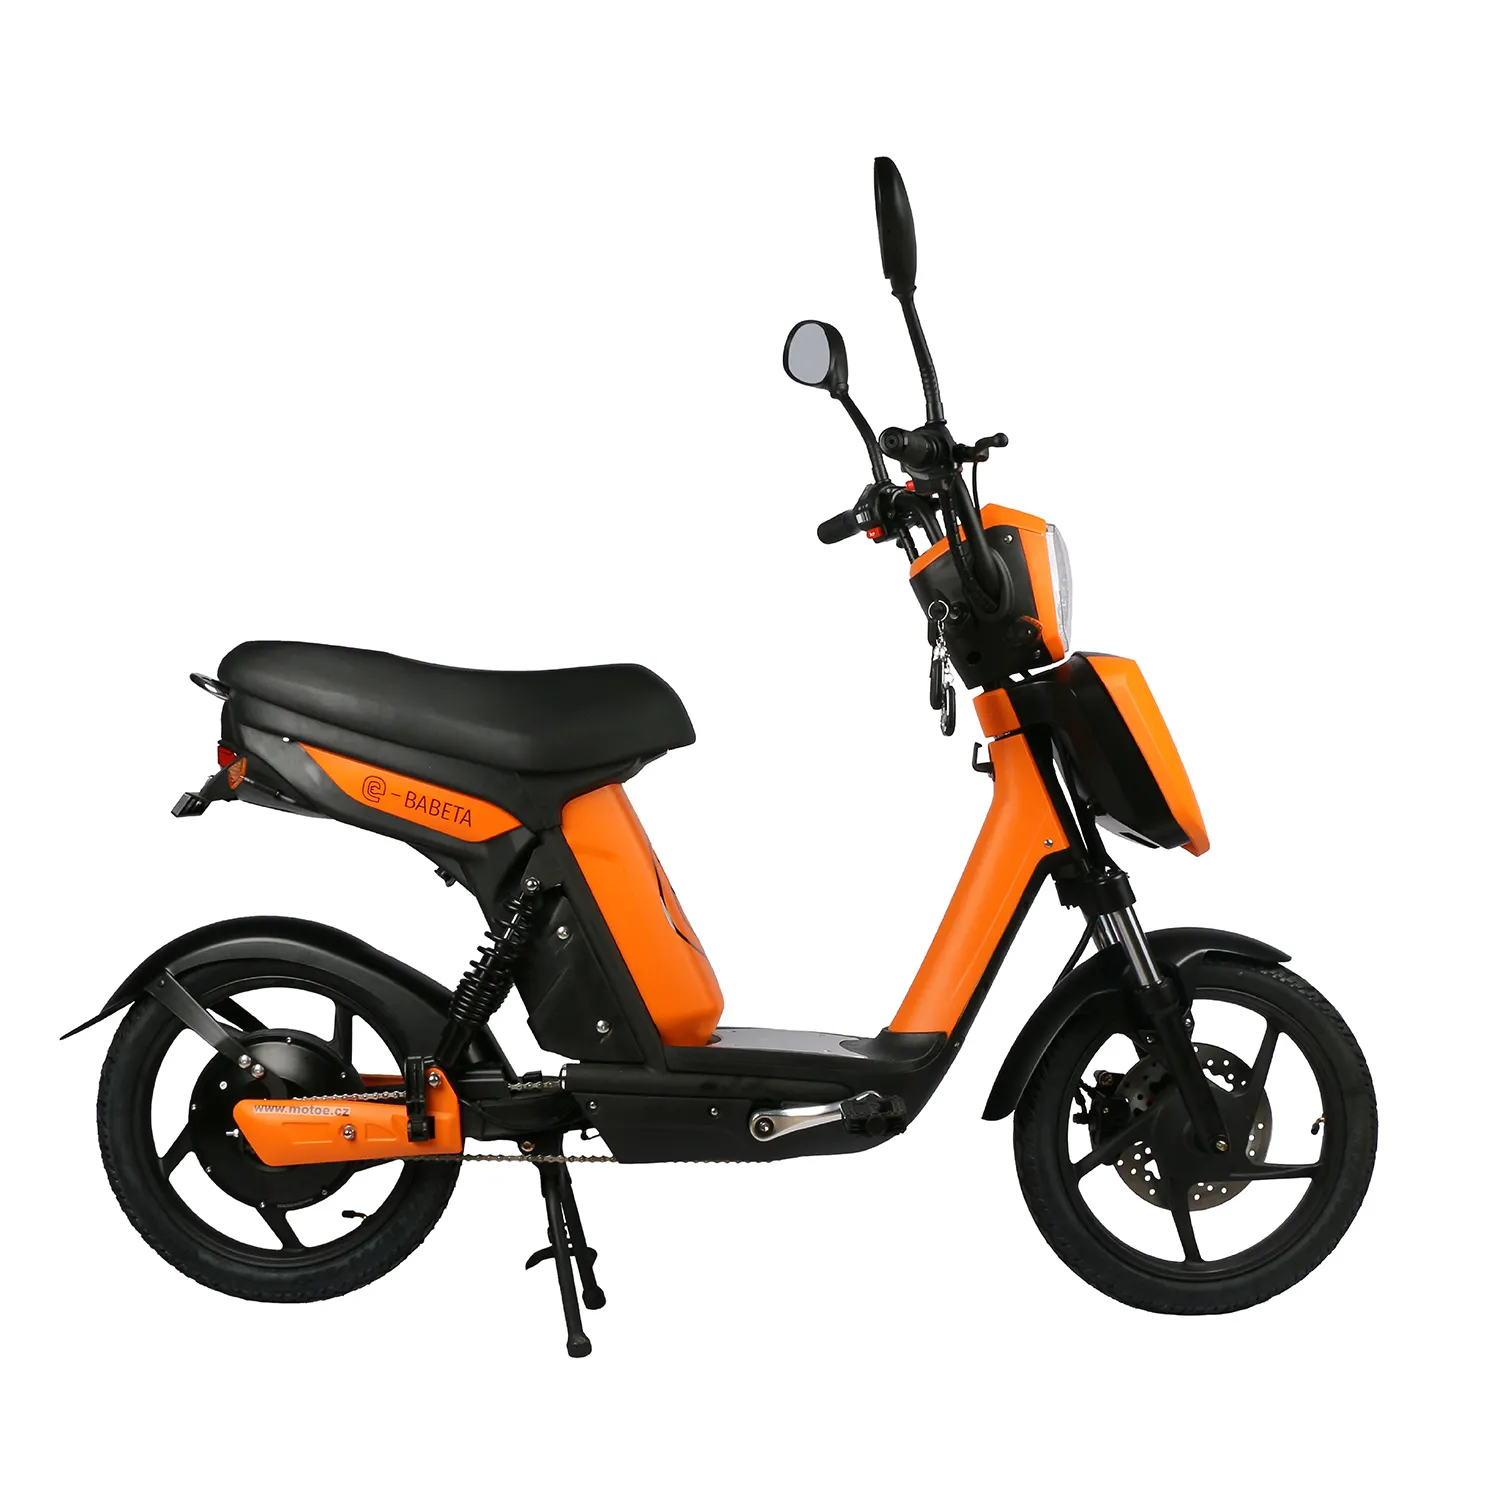 EU warehouse ready to ship dropshipping Germany mini two wheel 48v 250w 350w 450w pedal assist electric scooter motorcycle